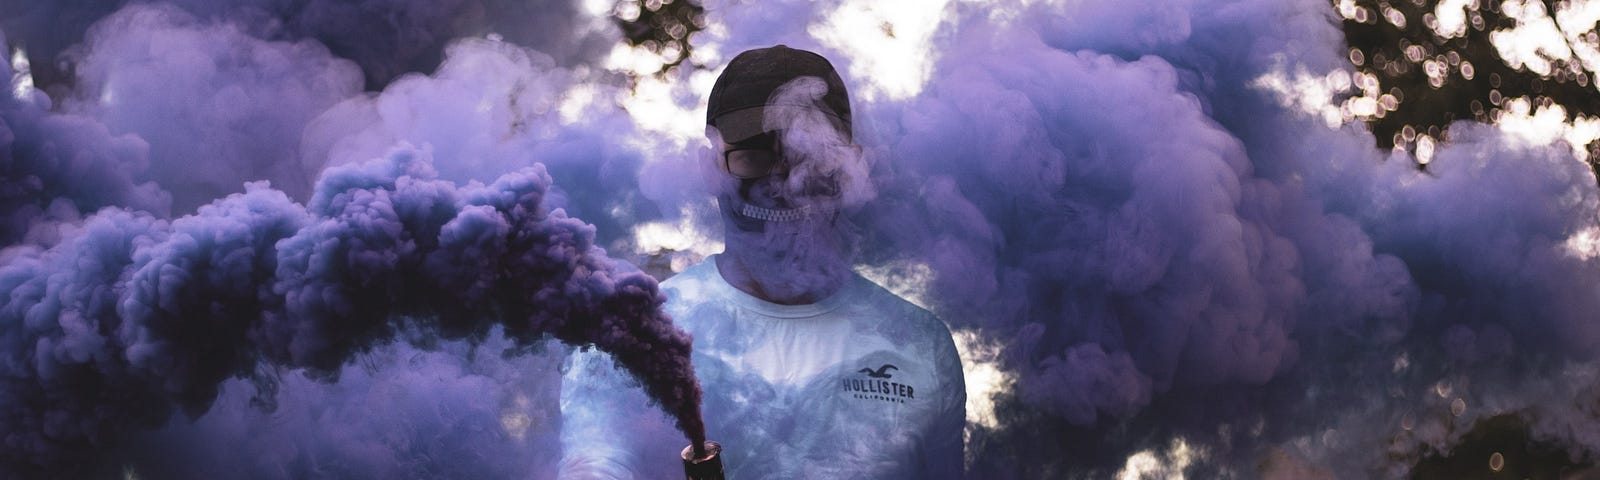 A person shrouded in purple smoke.